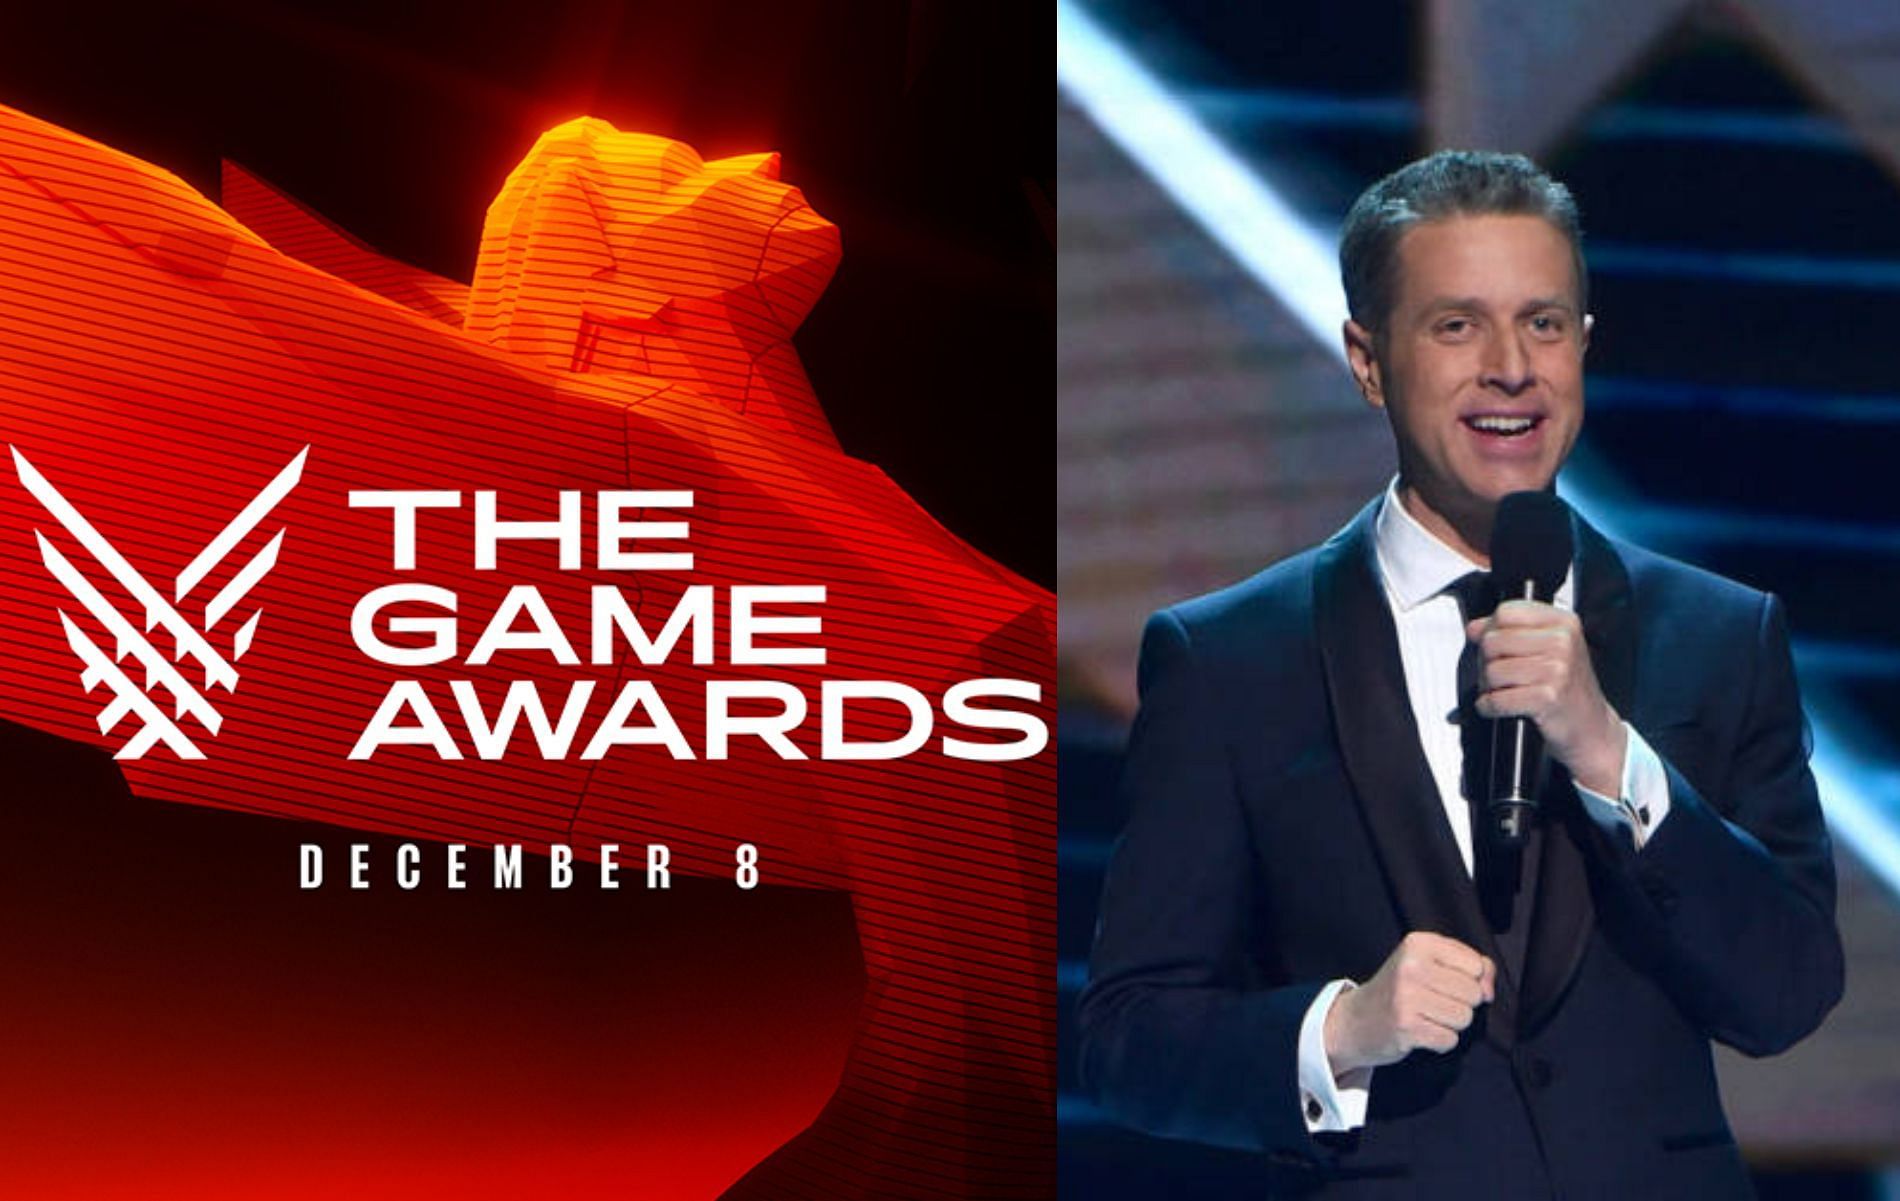 The WellPlayed Game Awards 2022 Winners